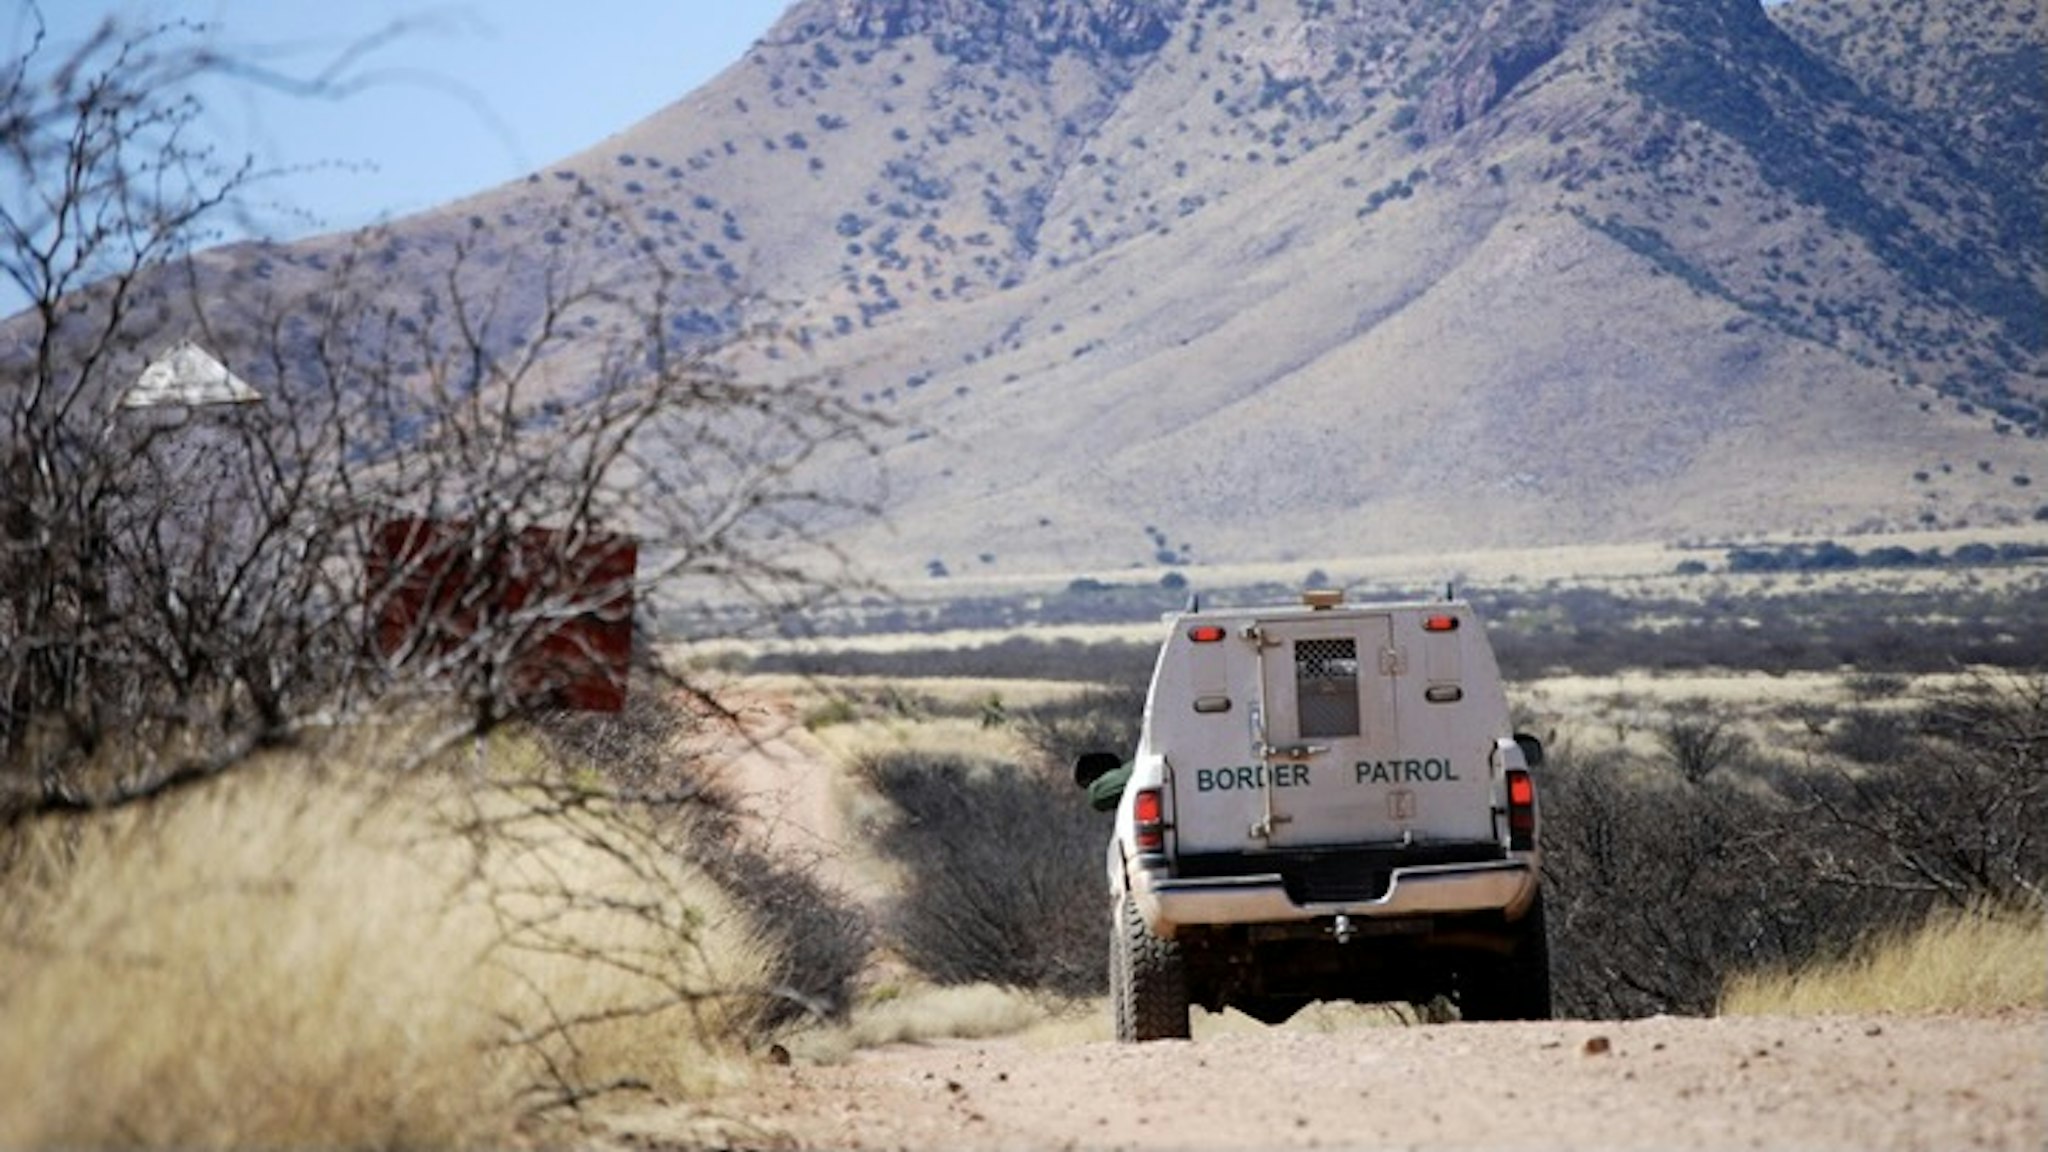 Border patrol truck with mountains - stock photo